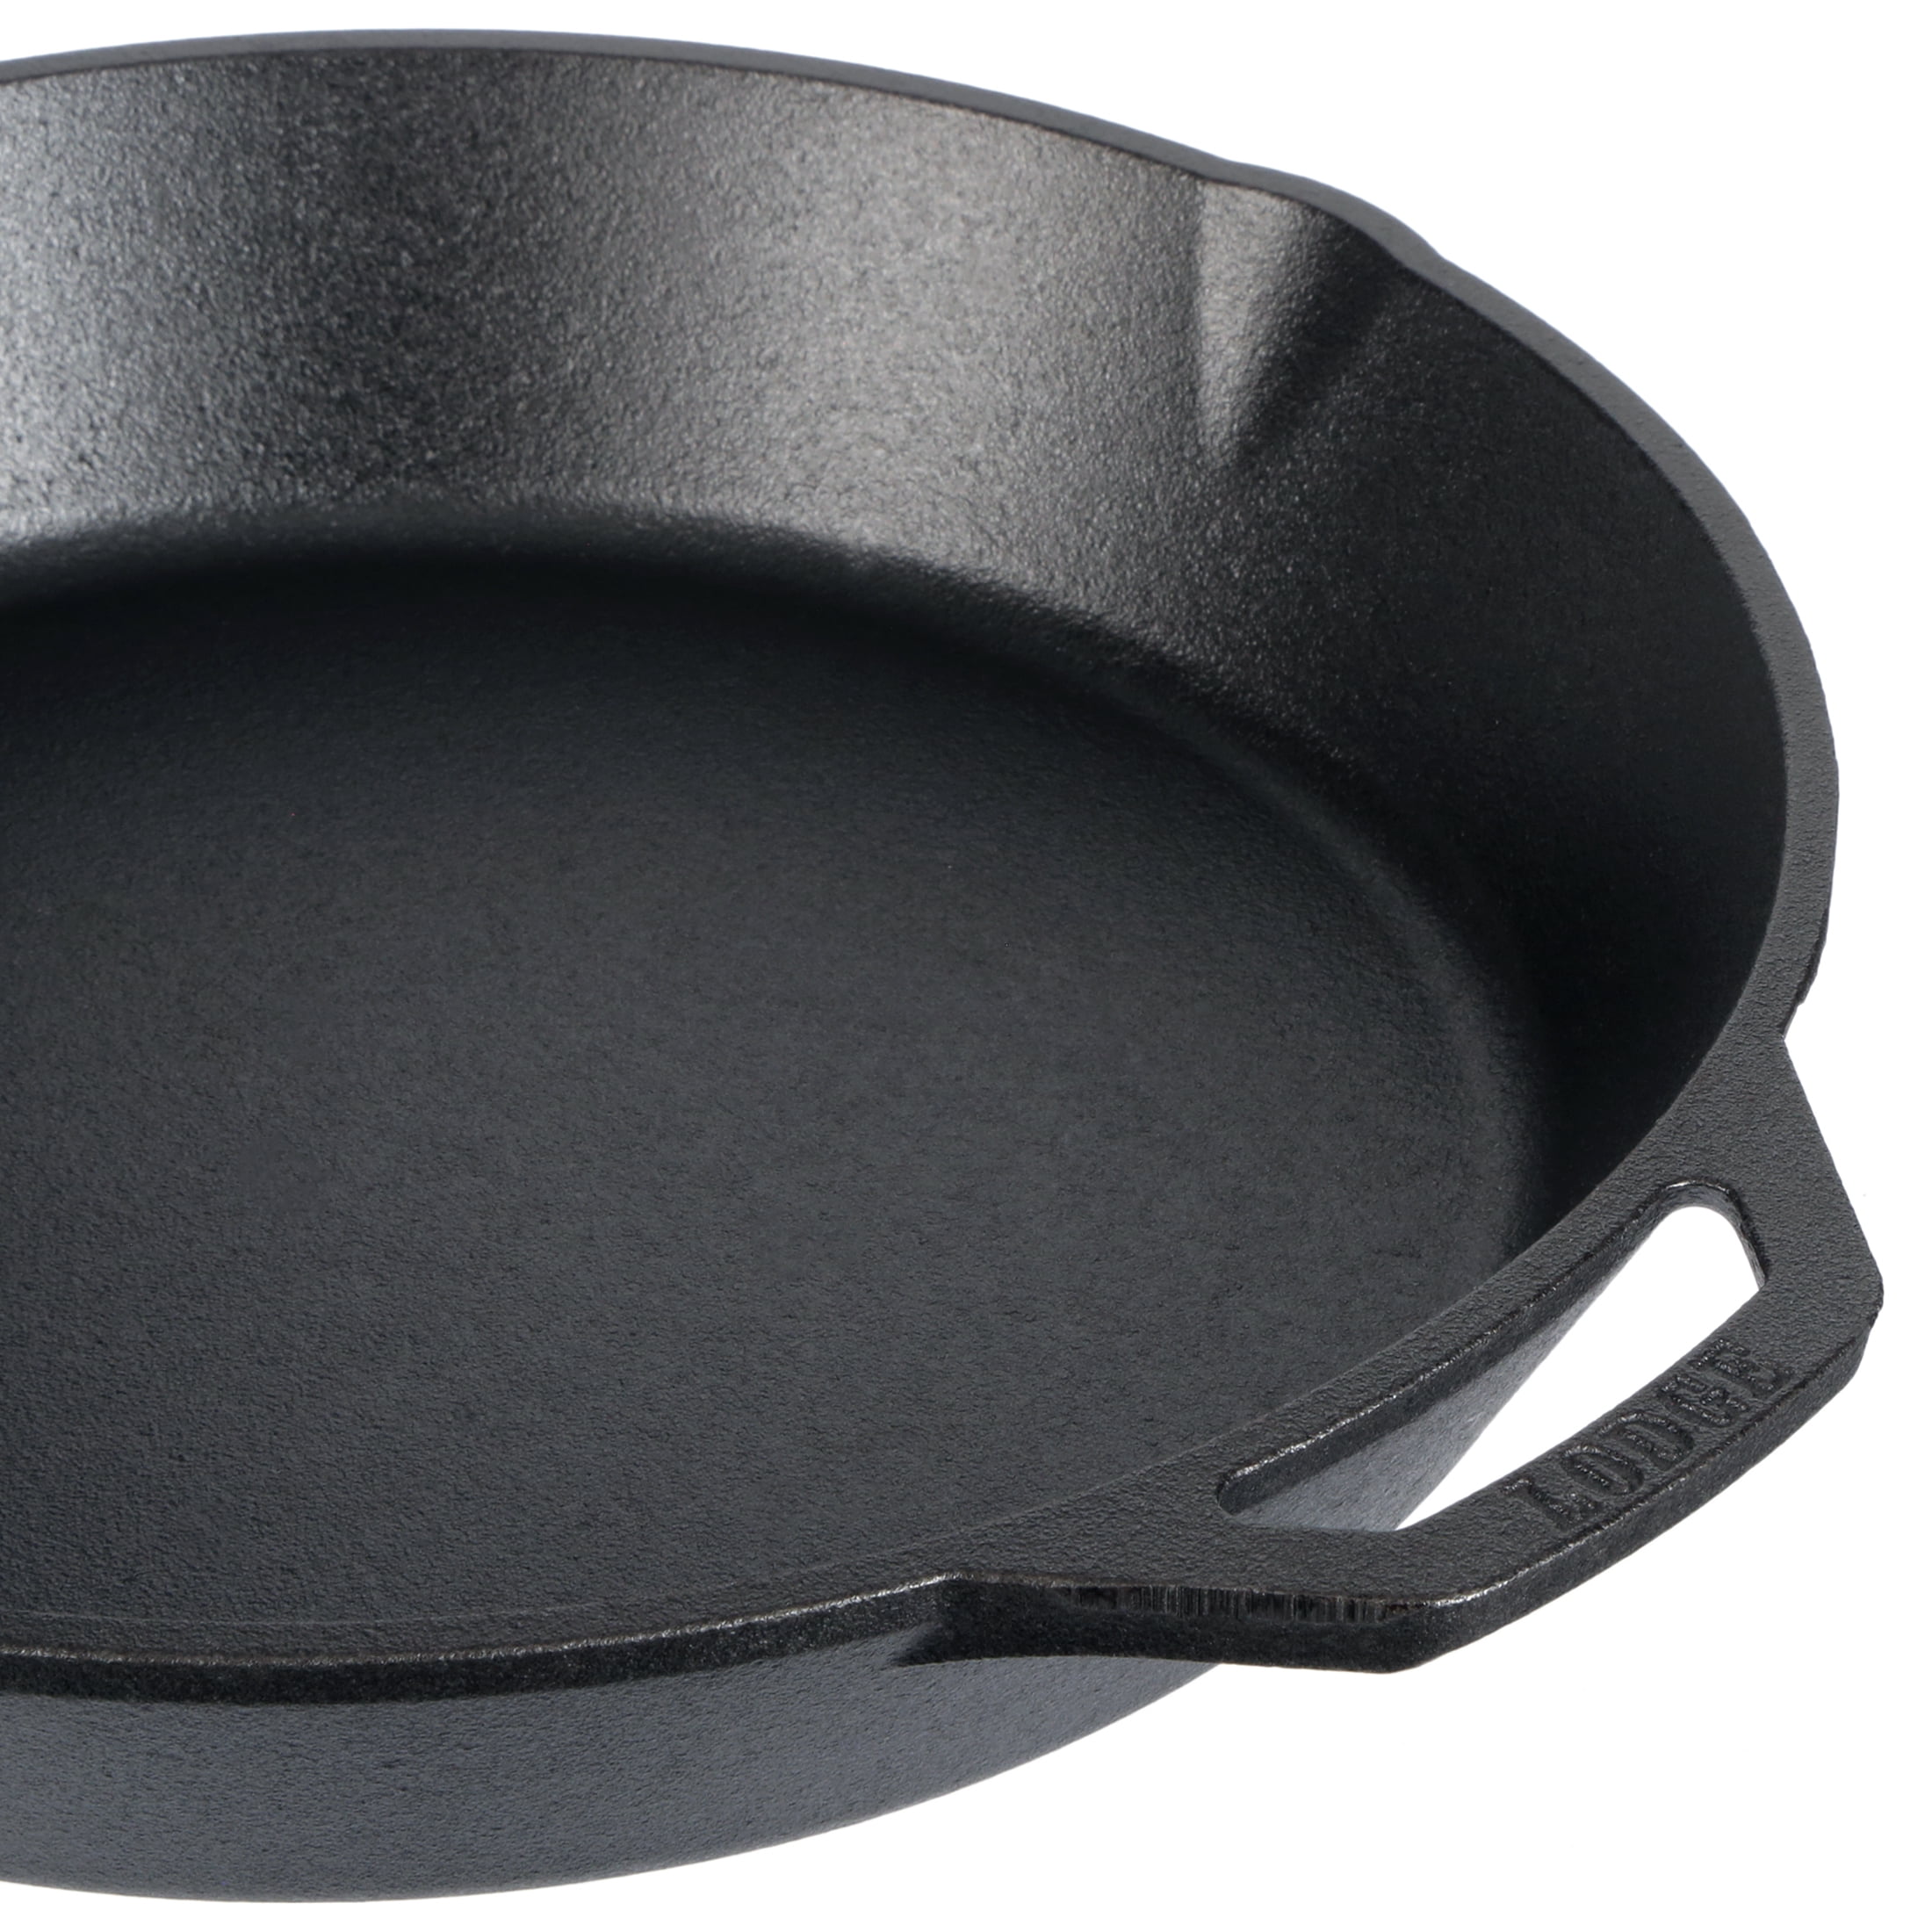 Lodge Cast Iron 13.75-Inch Cast Iron Skillet, Black, Carbon Steel Pan, Oven  Safe, Seasoned, Multi-Purpose Cooking Tool in the Cooking Pans & Skillets  department at